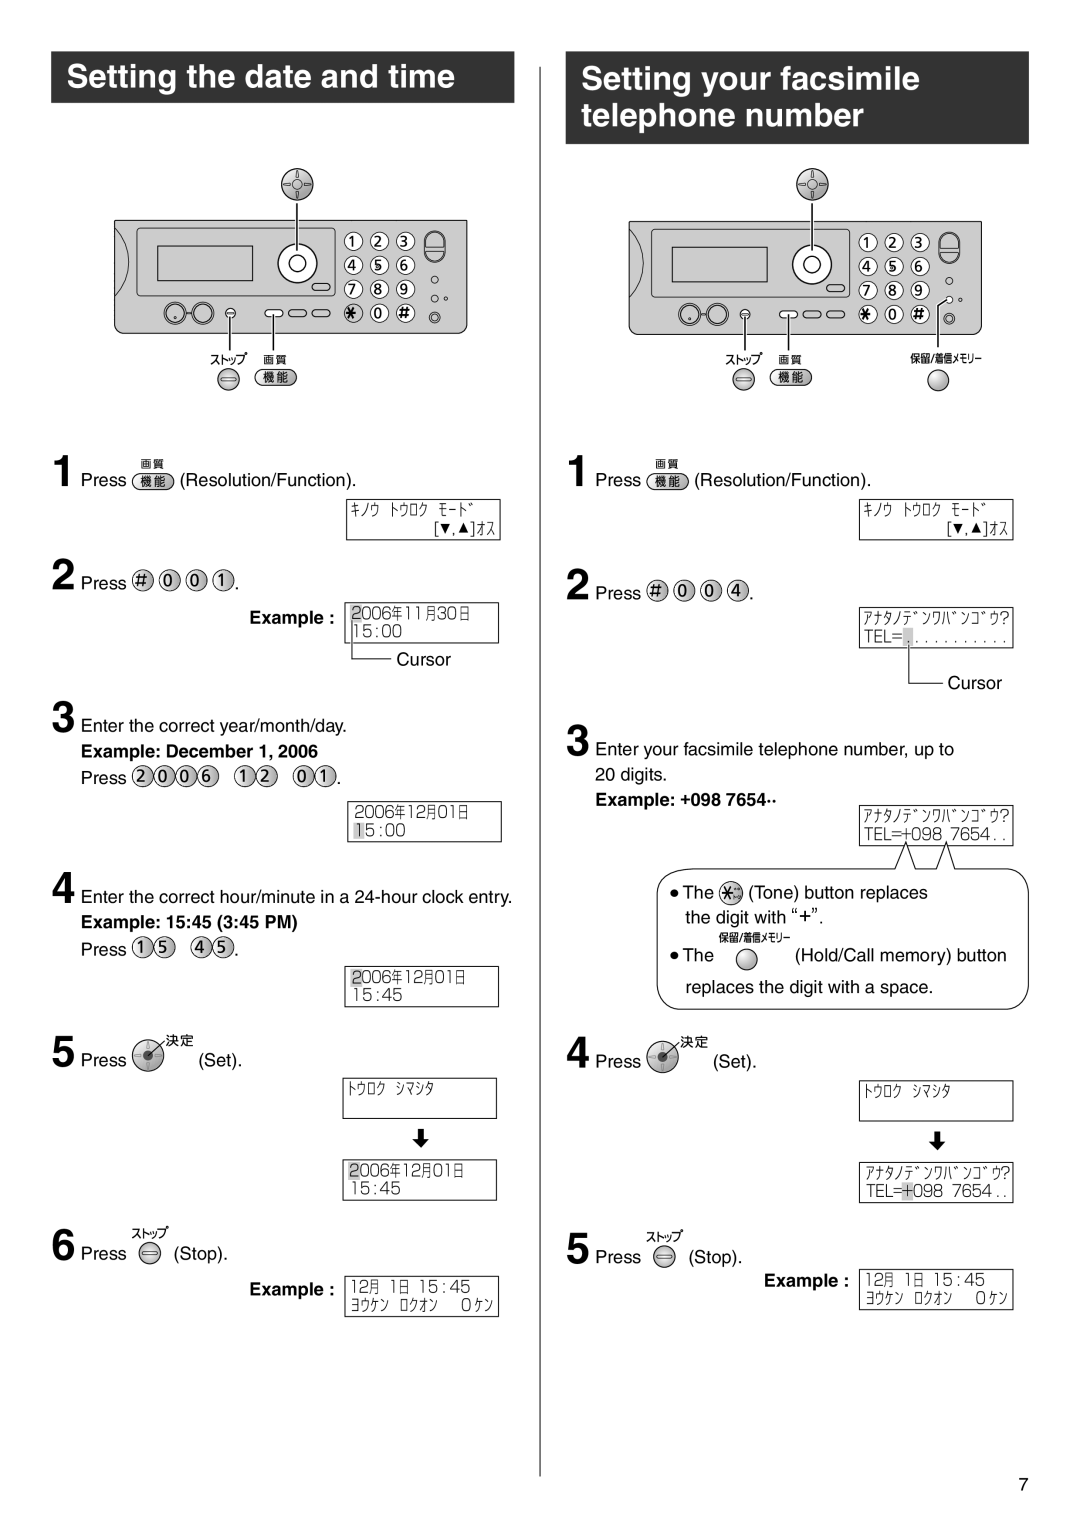 Panasonic KX-PW506DW manual Setting the date and time, Setting your facsimile telephone number, Example December 1 